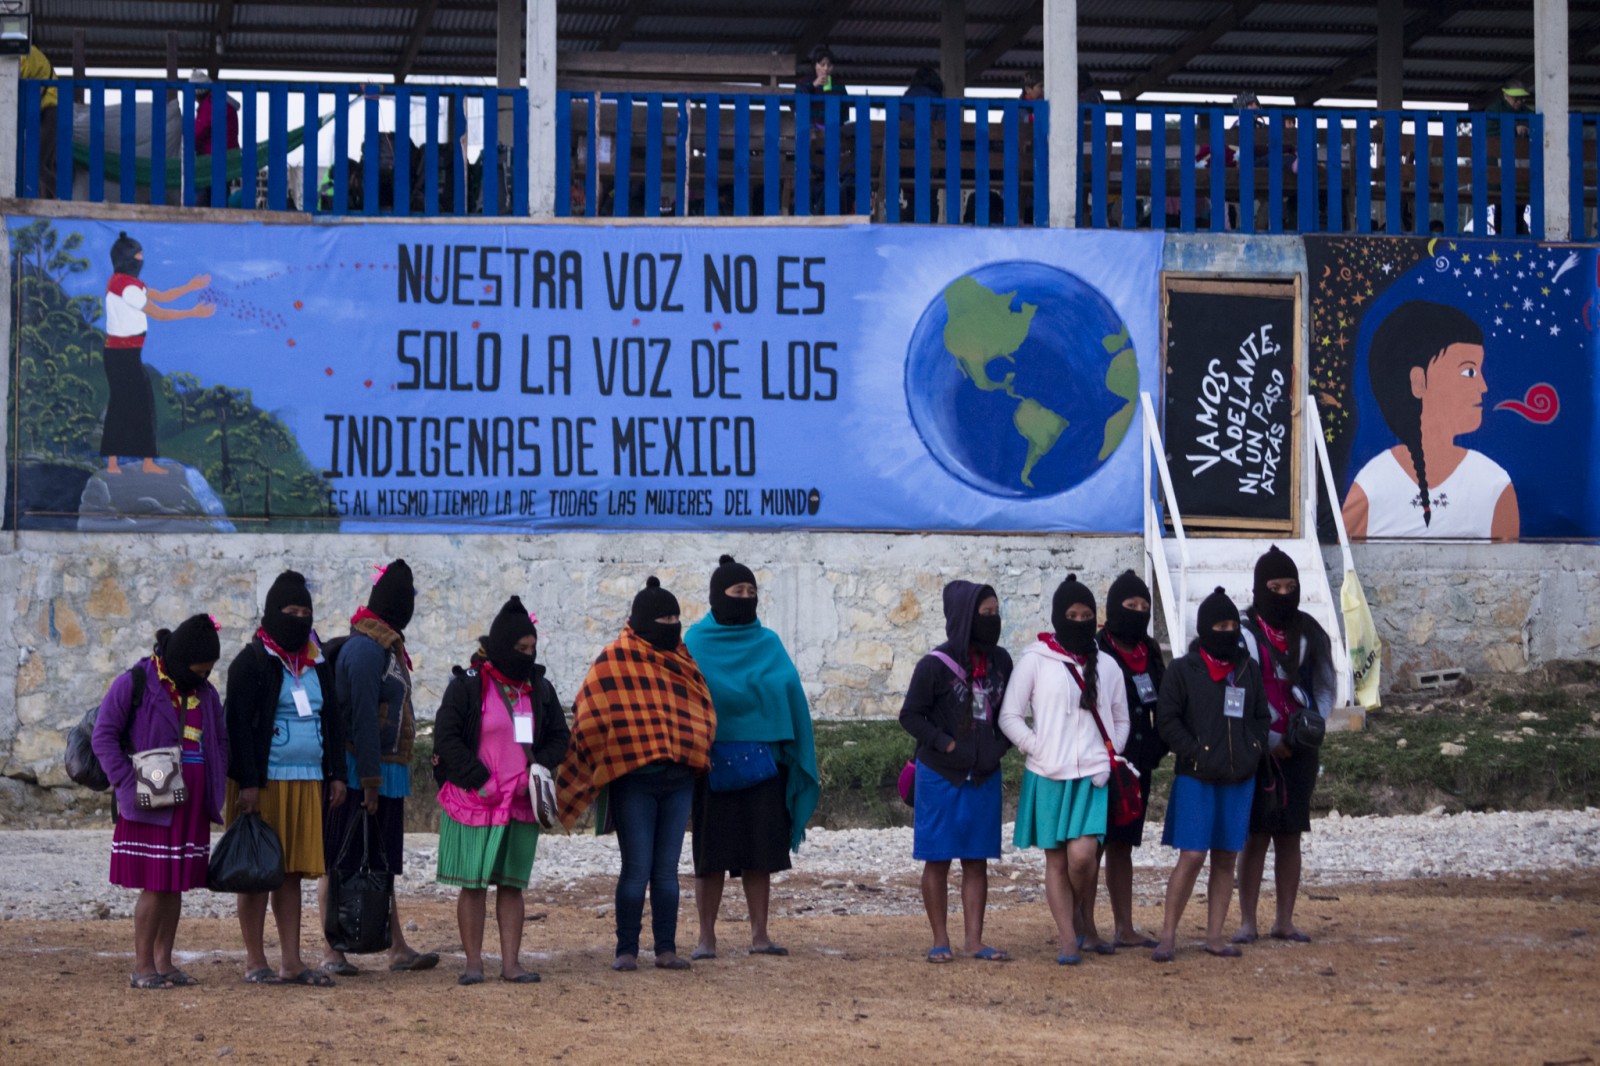 Zapatista women at the First International Gathering of Politics, Art, Sport, and Culture for Women who Struggle in the Zapatista Caracol of the Tzotz Choj Zone. Photo by Mexican photo-documentalist Regina López, 2018. © Regina López (photo). Courtesy of the artist.